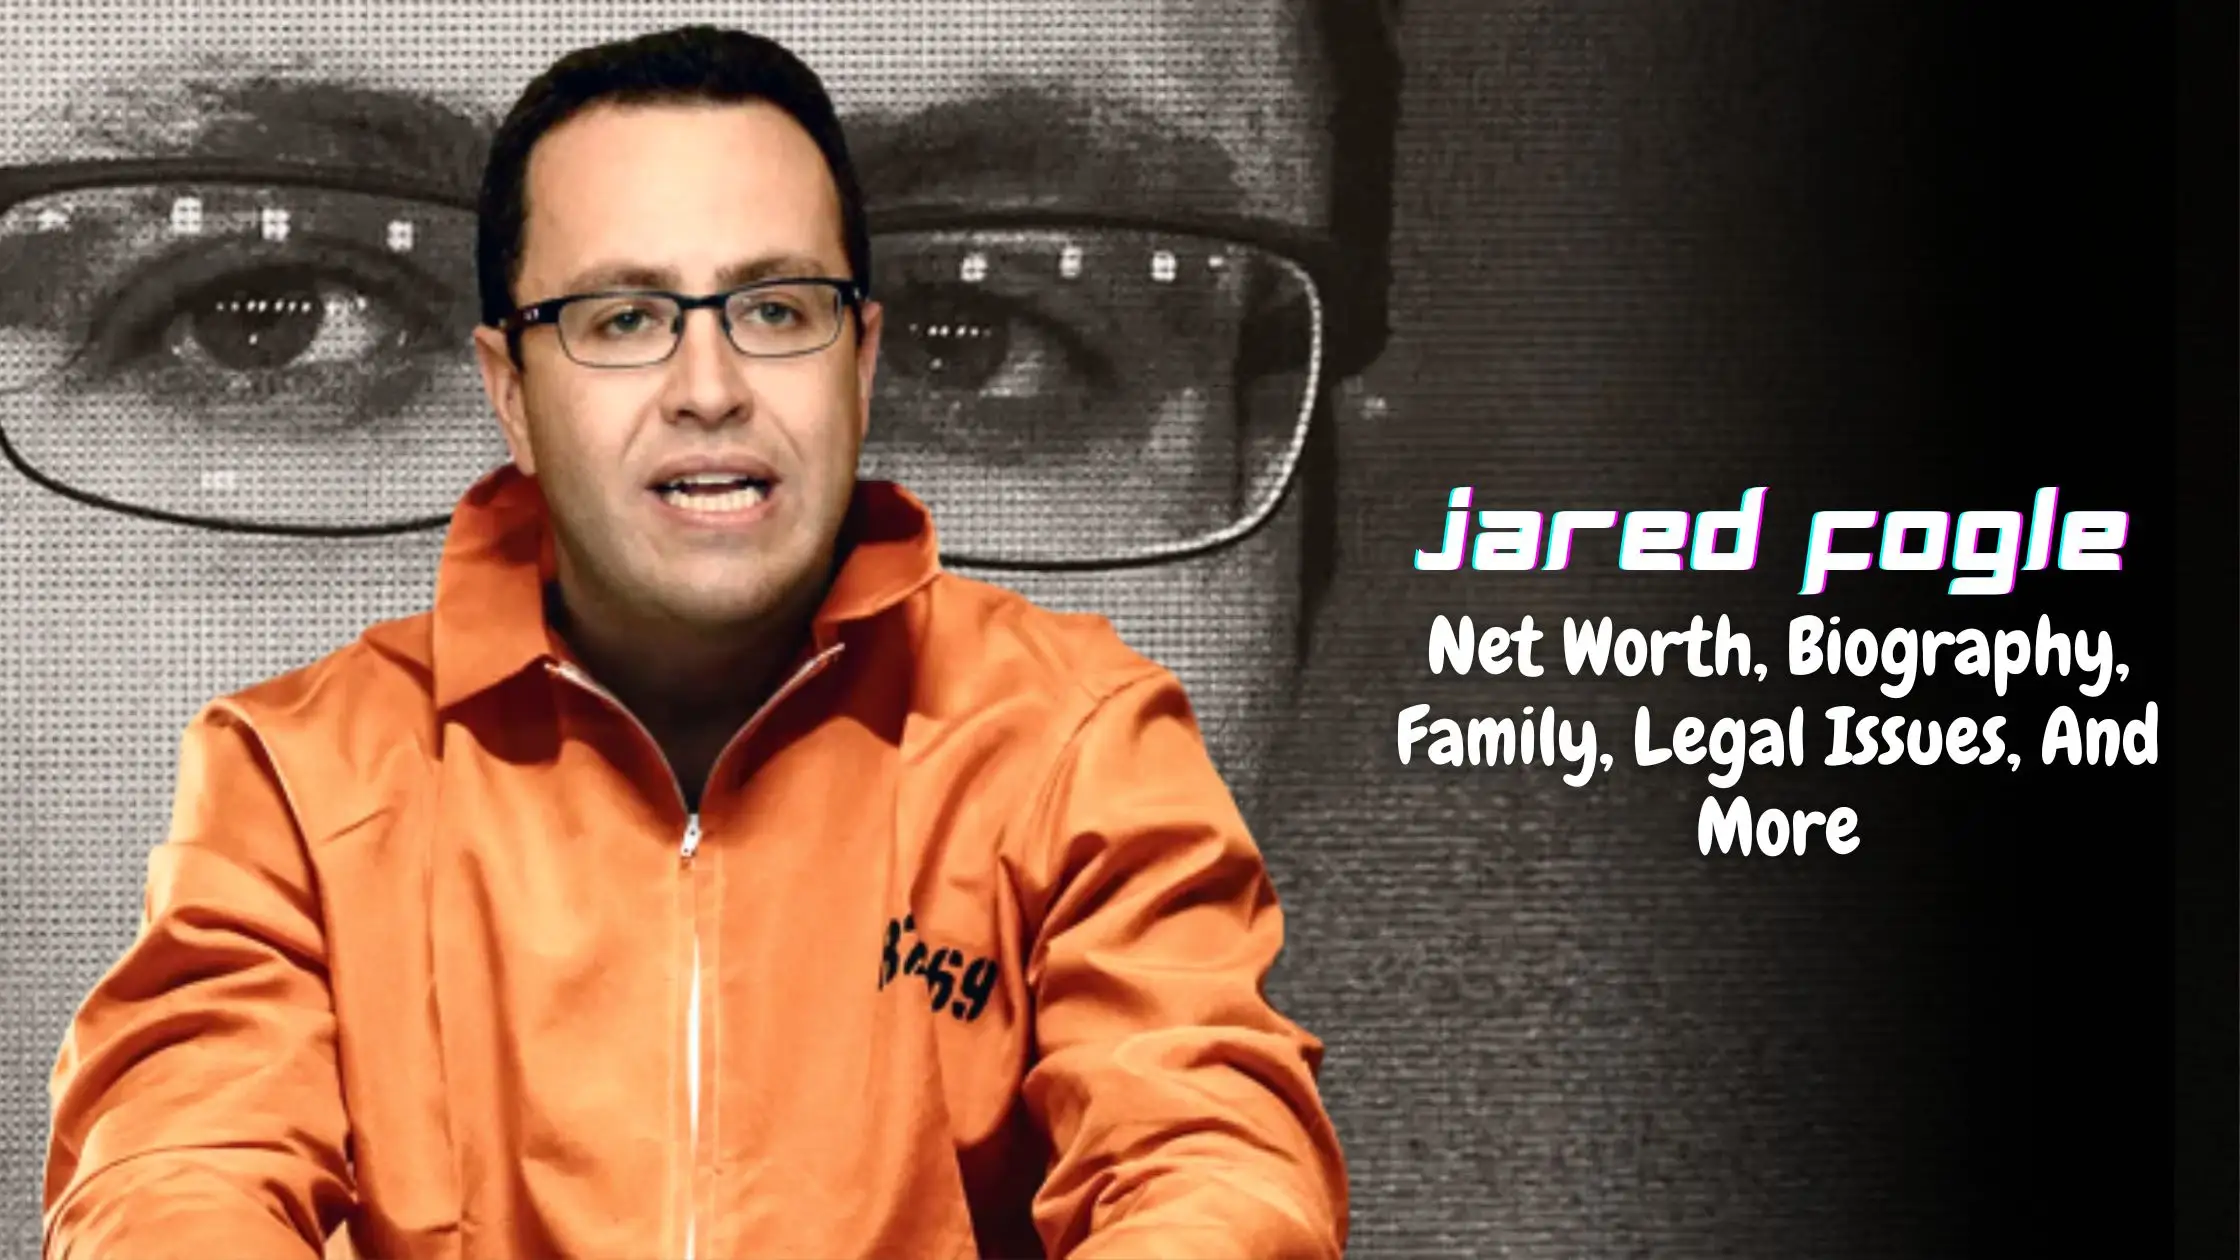 Jared Fogle Net Worth, Biography, Family, Legal Issues, And More